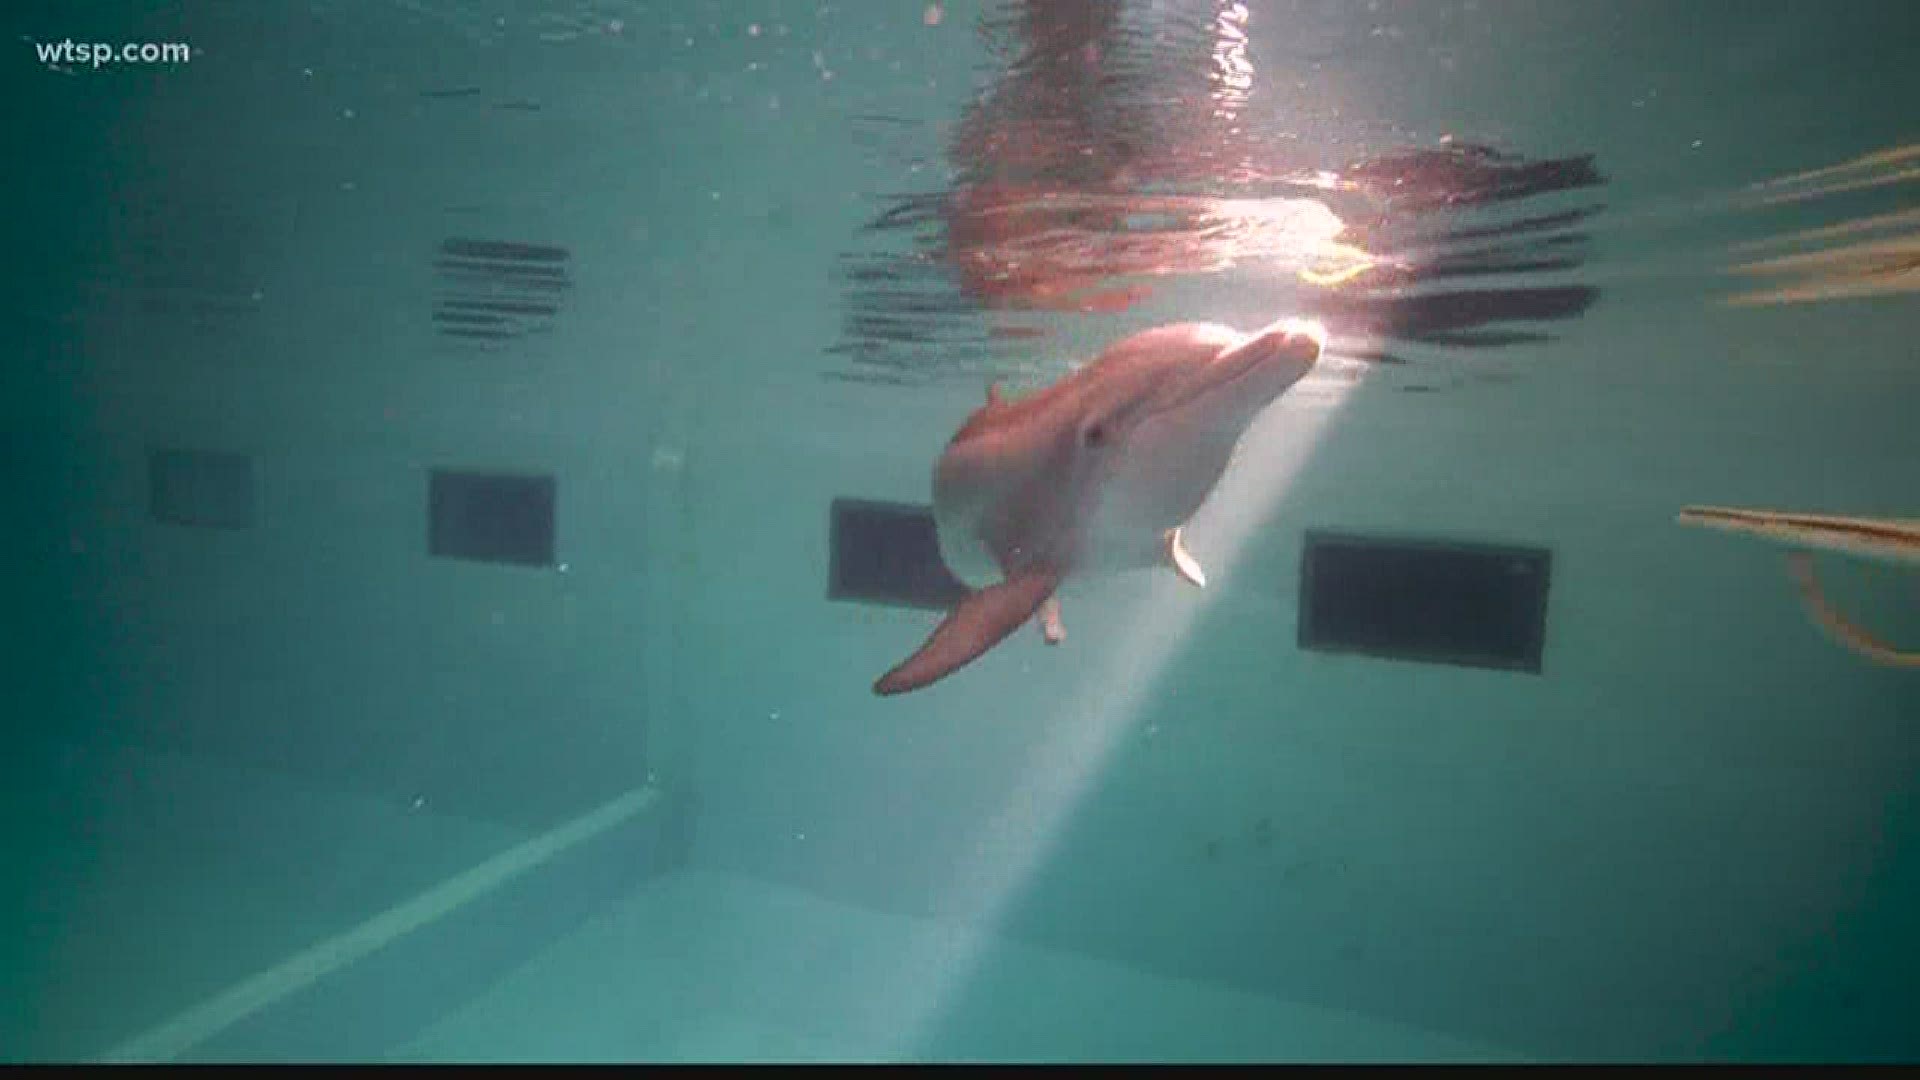 For us humans, there’s plenty of stress and concern about coronavirus right now. But inside the Clearwater Marine Aquarium, life for rescued animals continues.